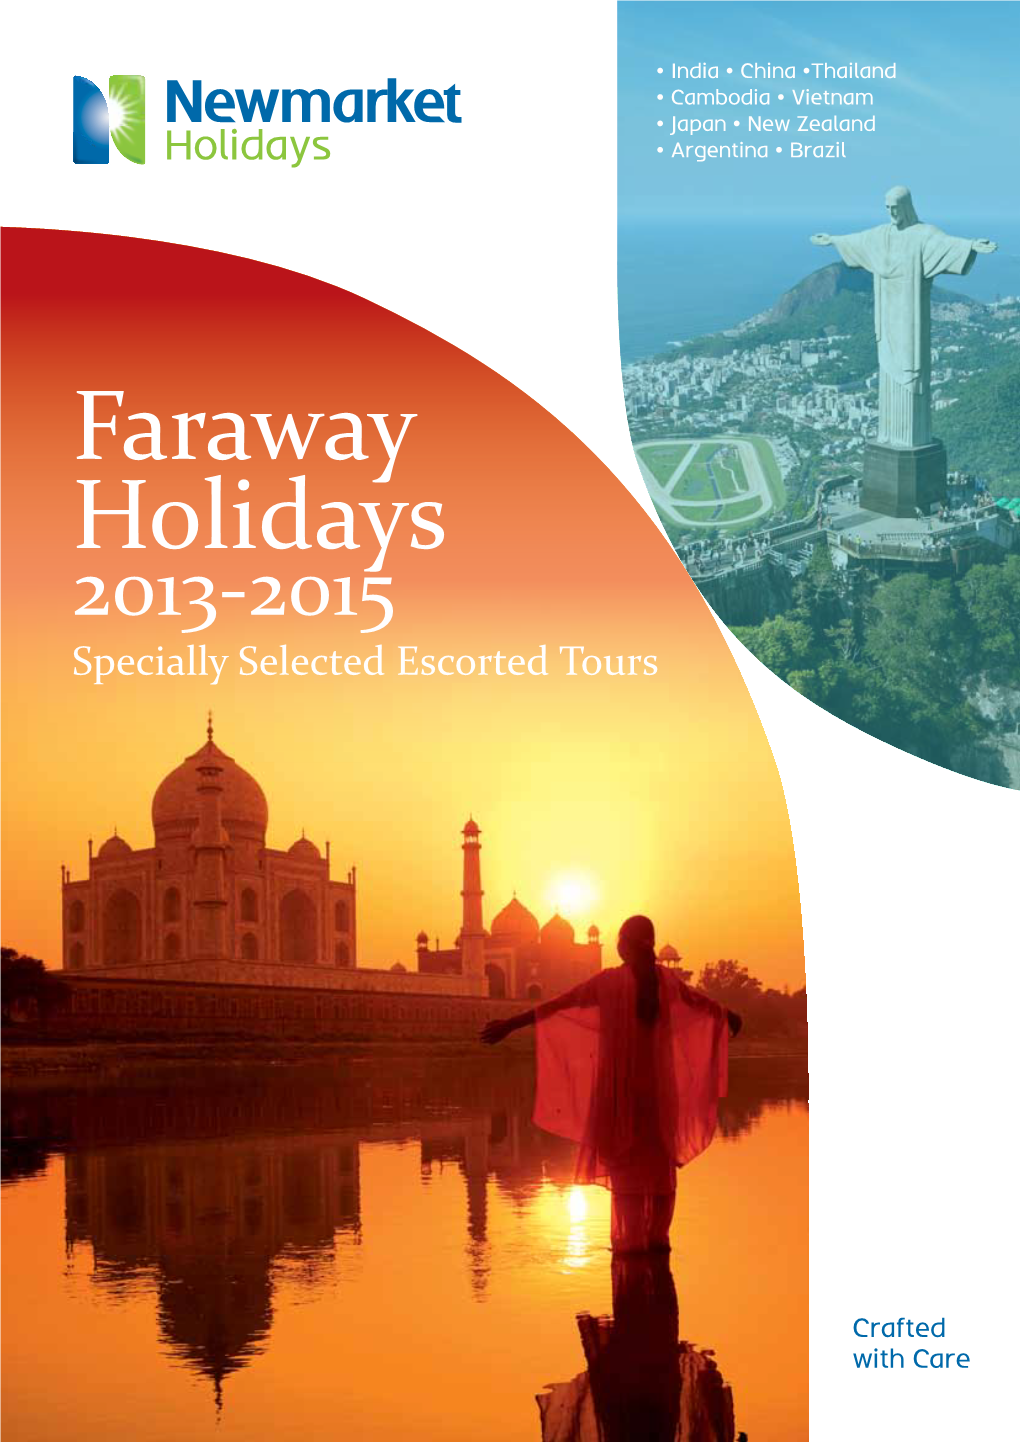 Faraway Holidays 2013-2015 Specially Selected Escorted Tours